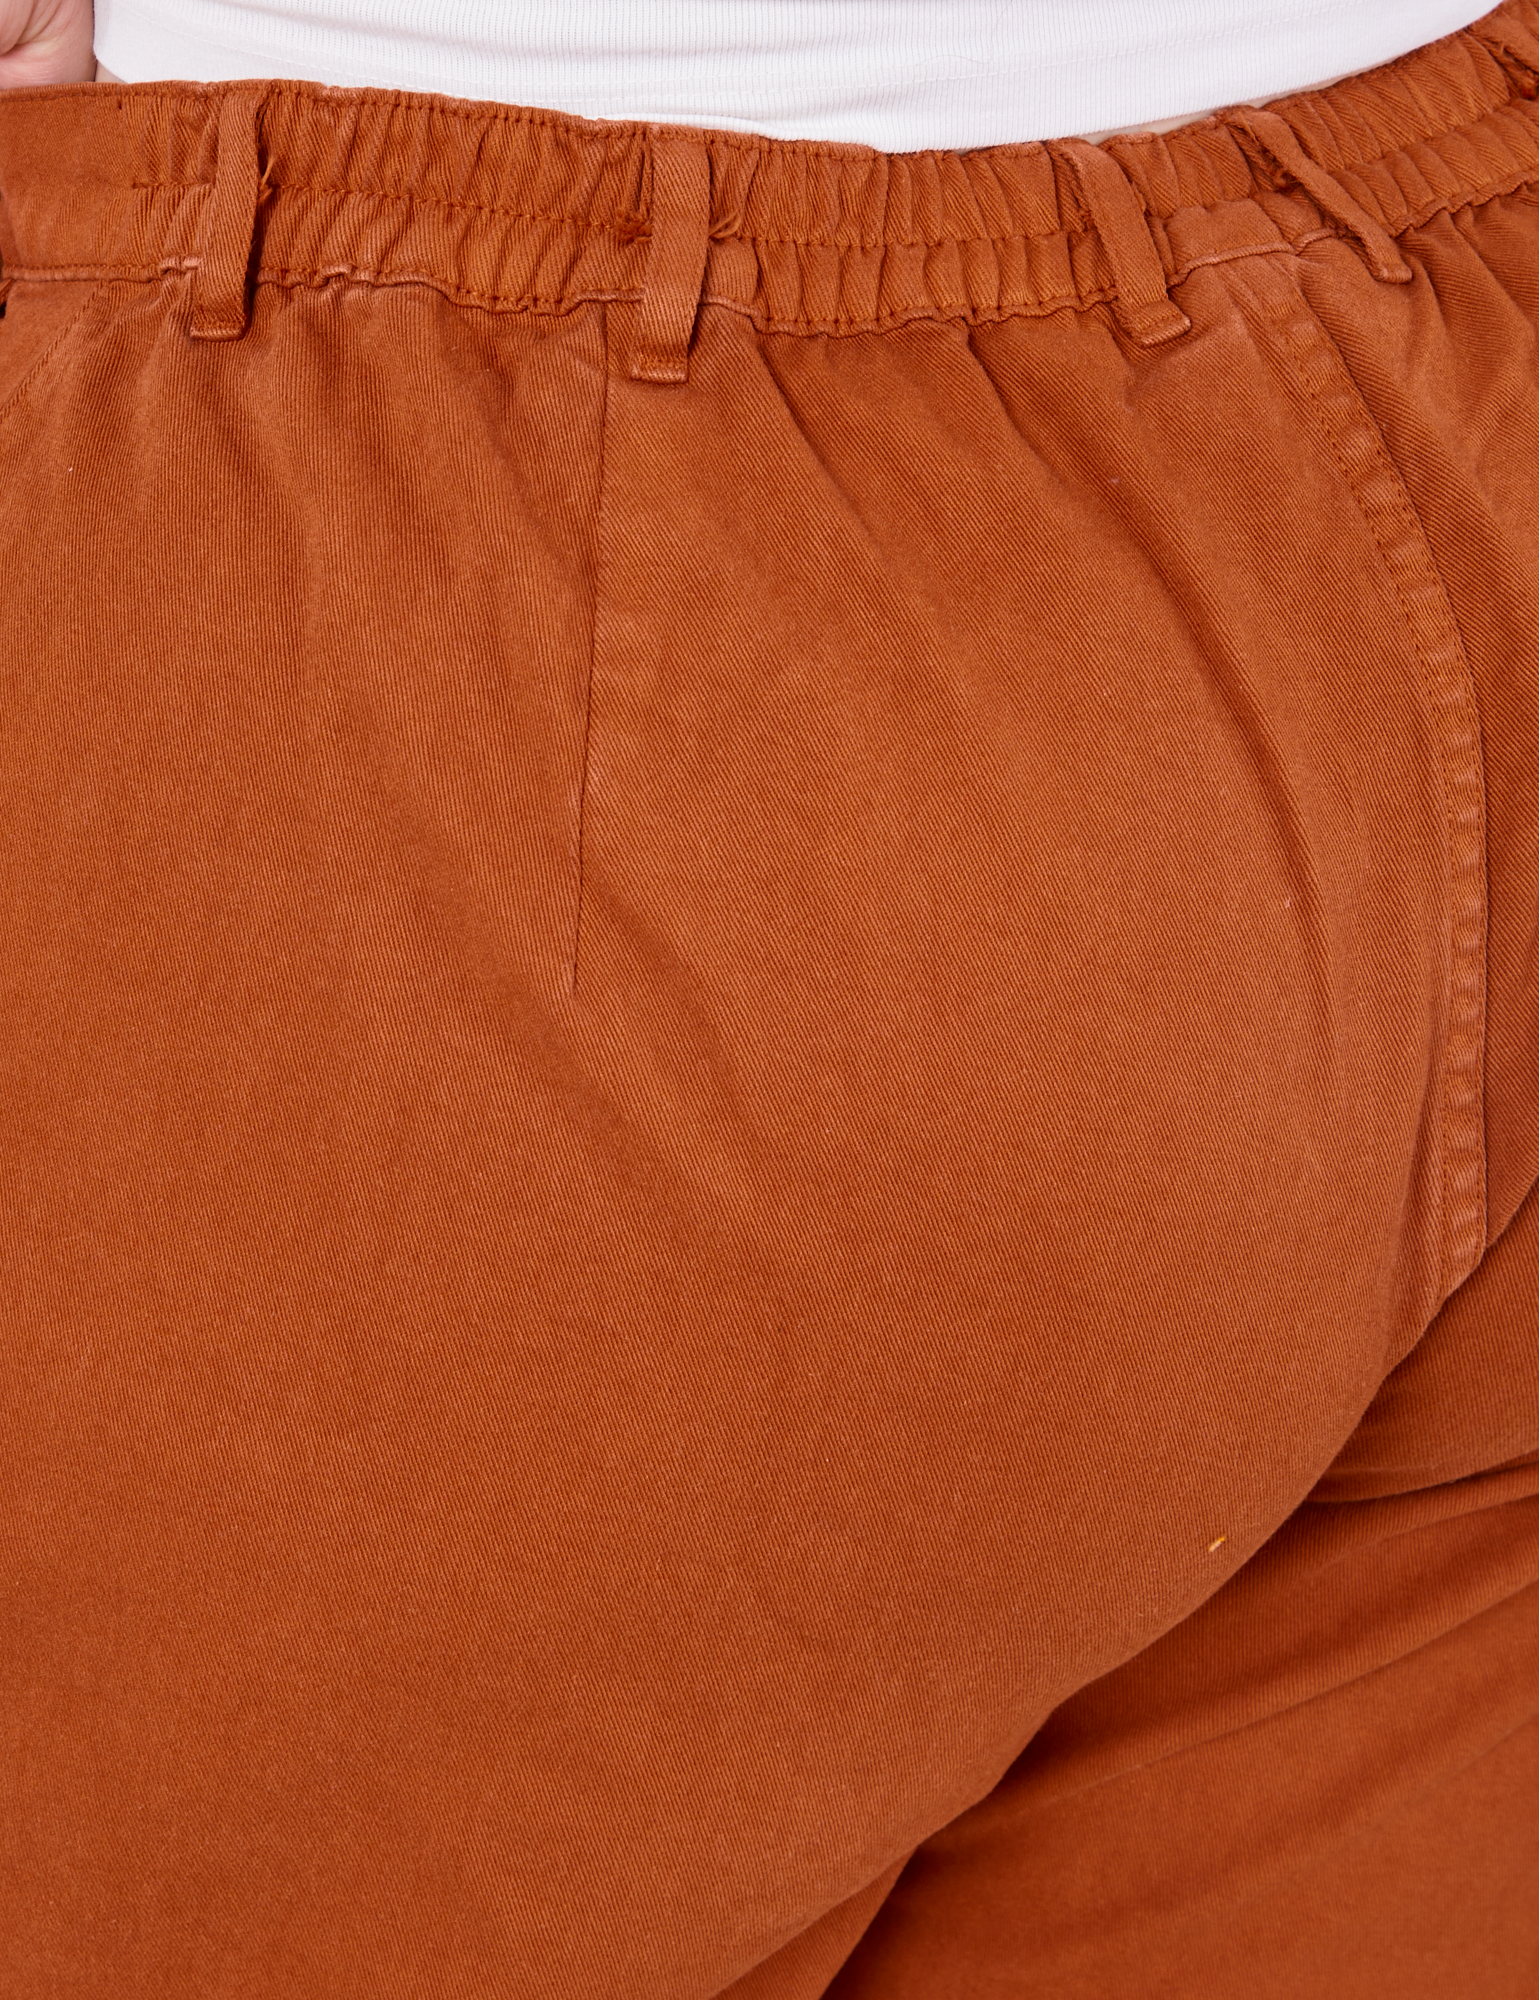 Back view close up of Heavyweight Trousers in Burnt Terracotta on Ashley